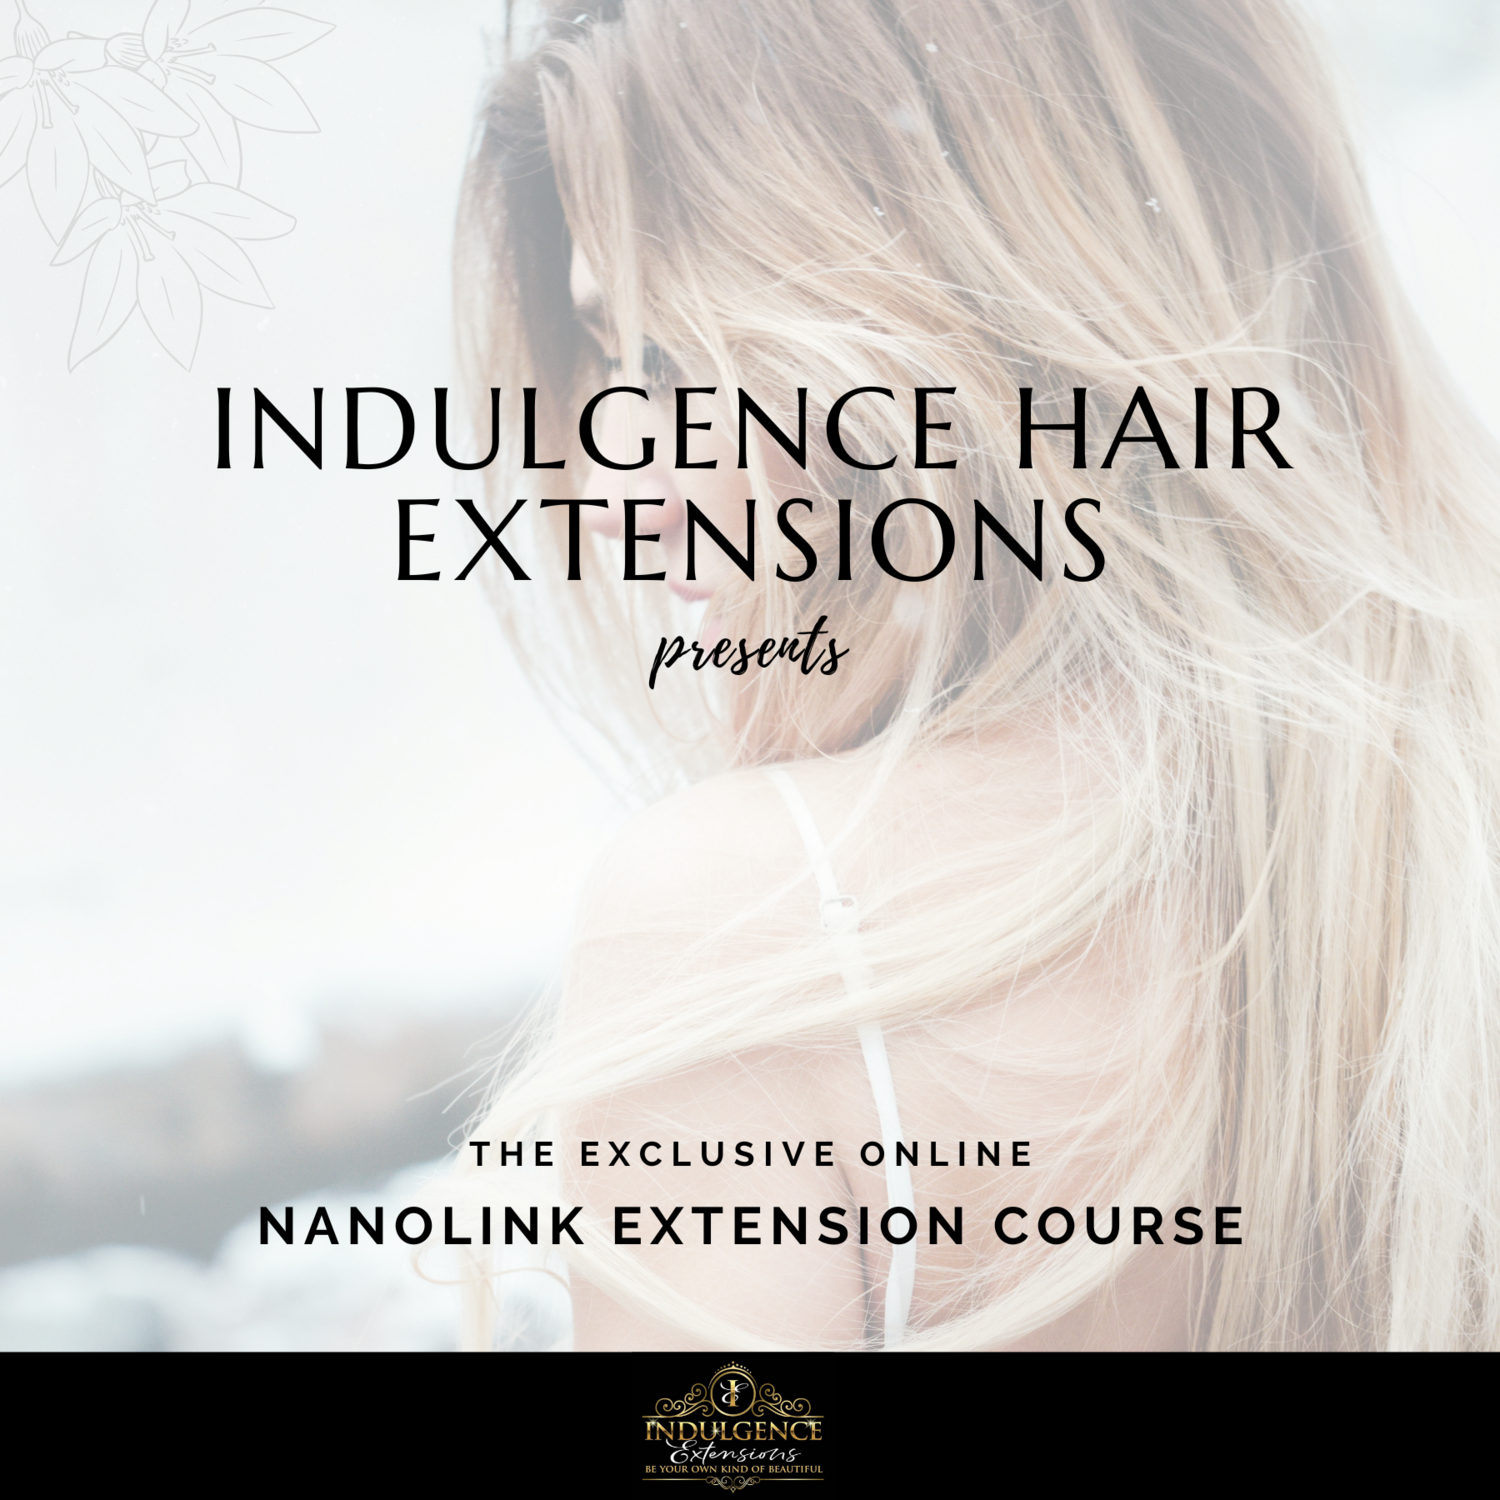 Hair extensions course at a price 225 in London training with a  certificate at the Lecole De Beaute School